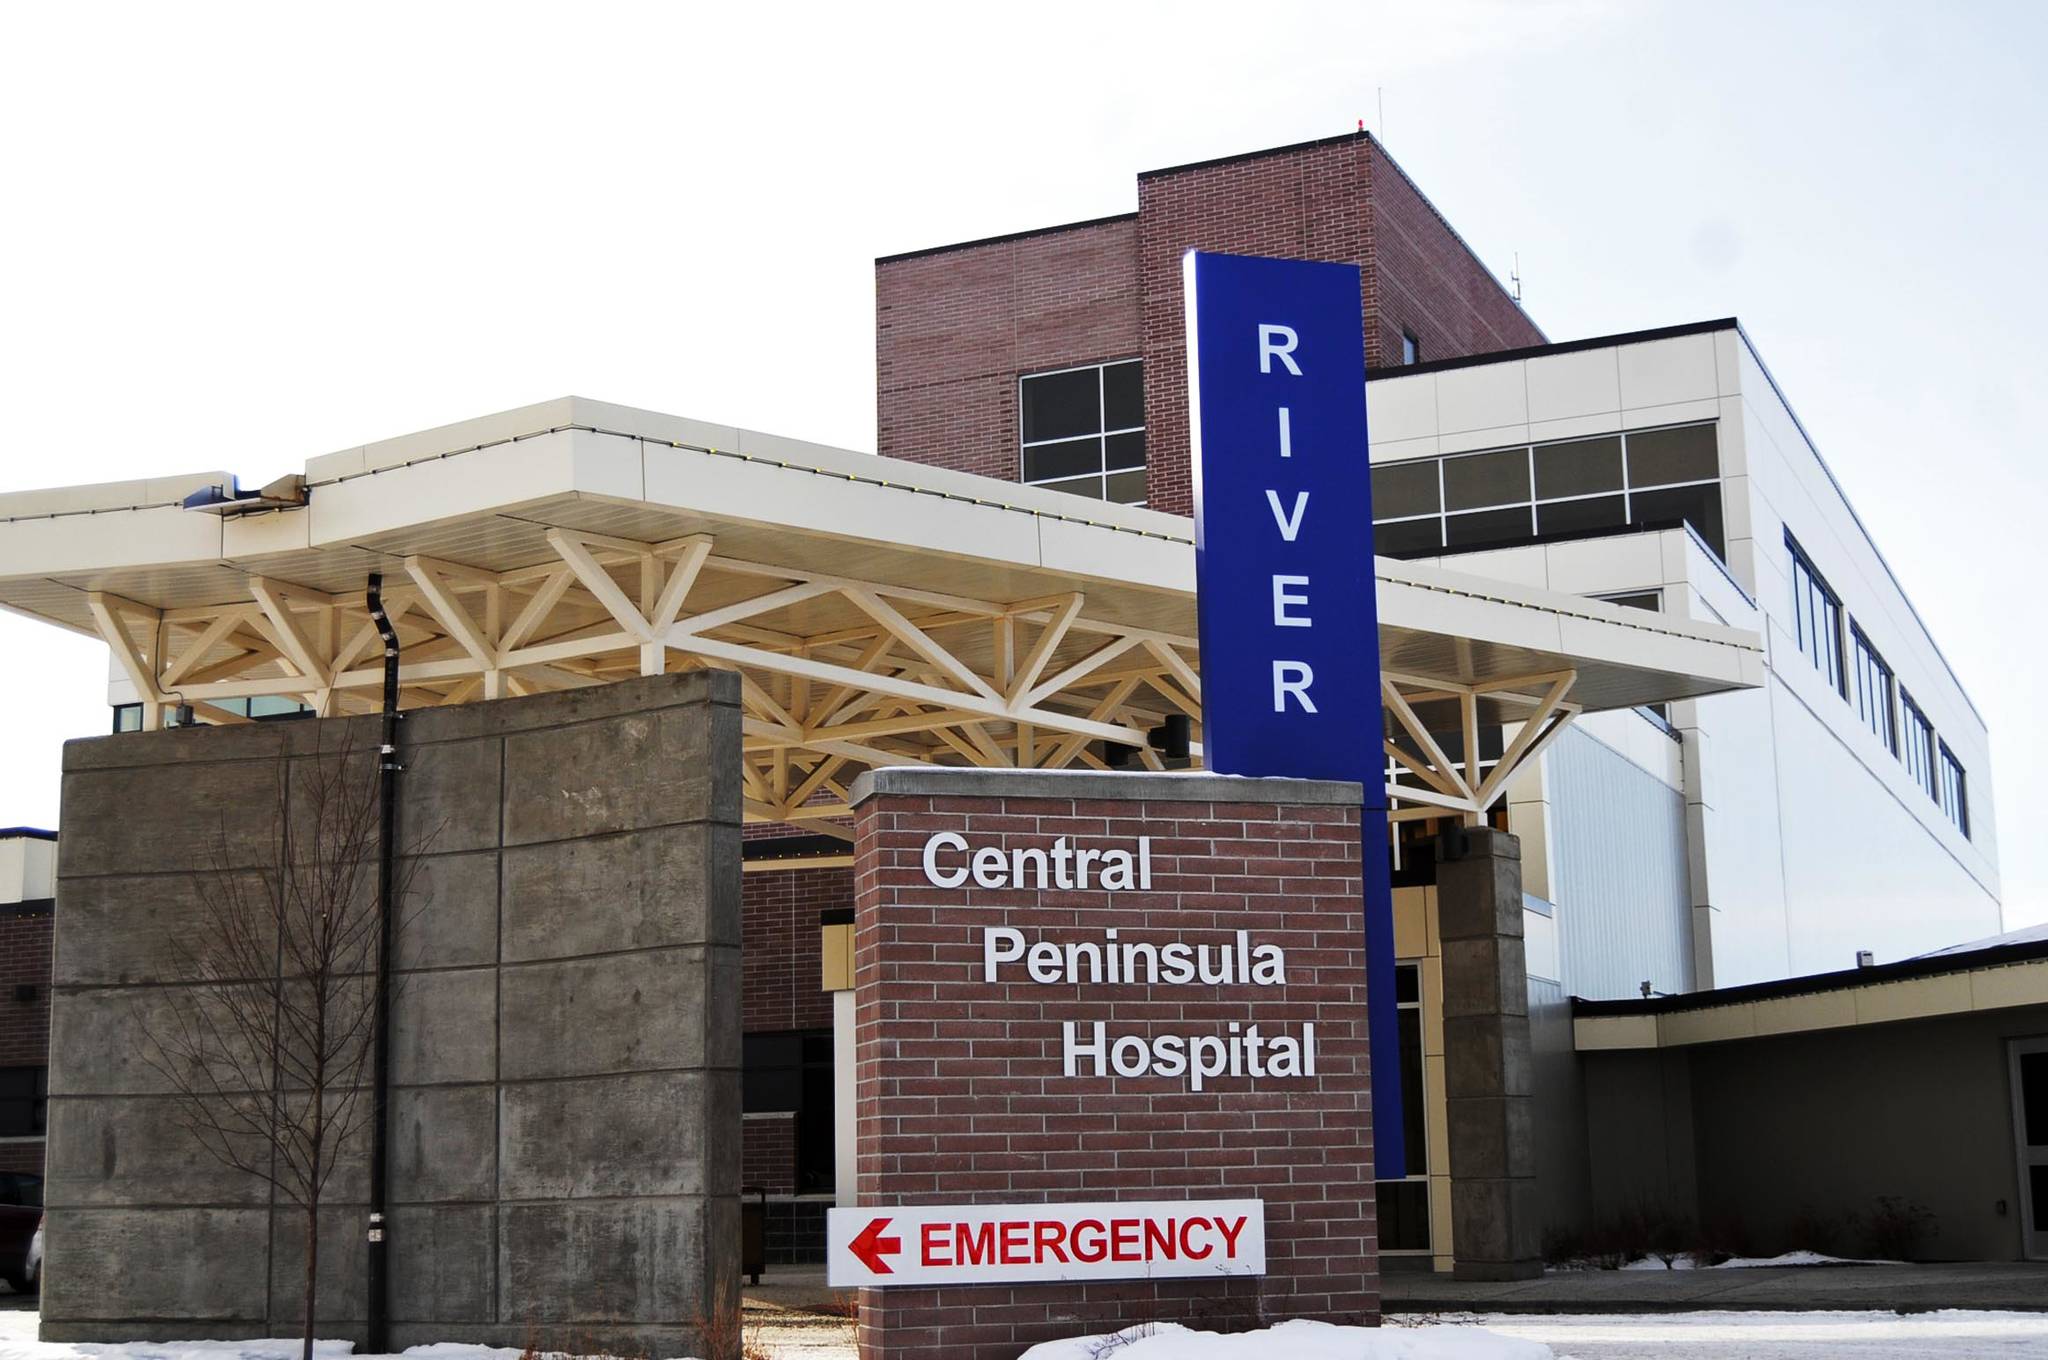 This March 29, 2017 photo shows Central Peninsula Hospital’s River Tower, which houses specialty medical services, in Soldotna, Alaska. (Photo by Elizabeth Earl/Peninsula Clarion, file)